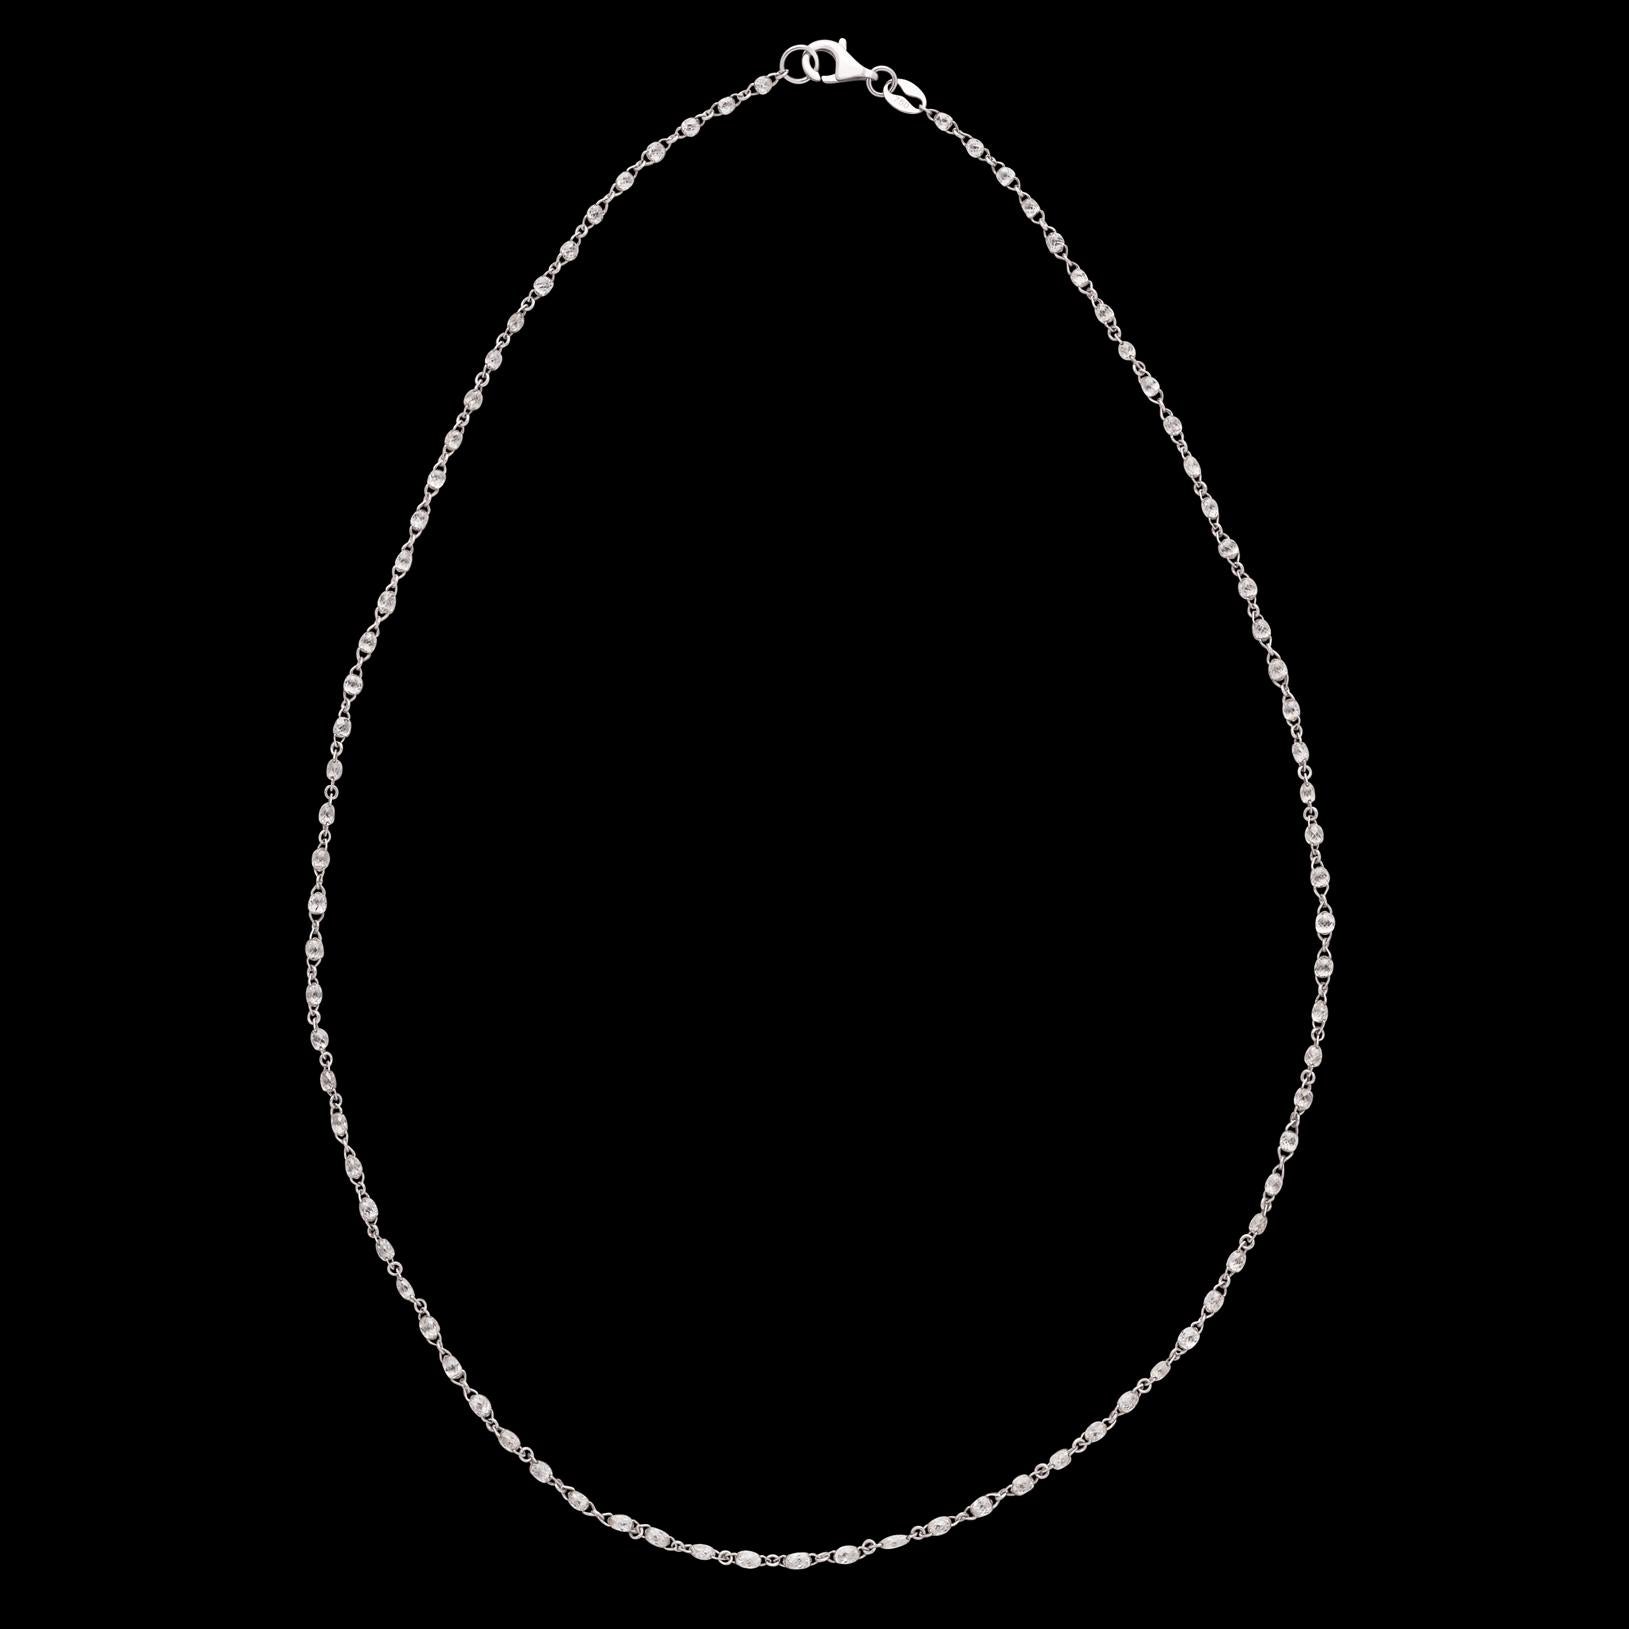 7.57 Carat Diamond Necklace in 18kt White Gold For Sale 2